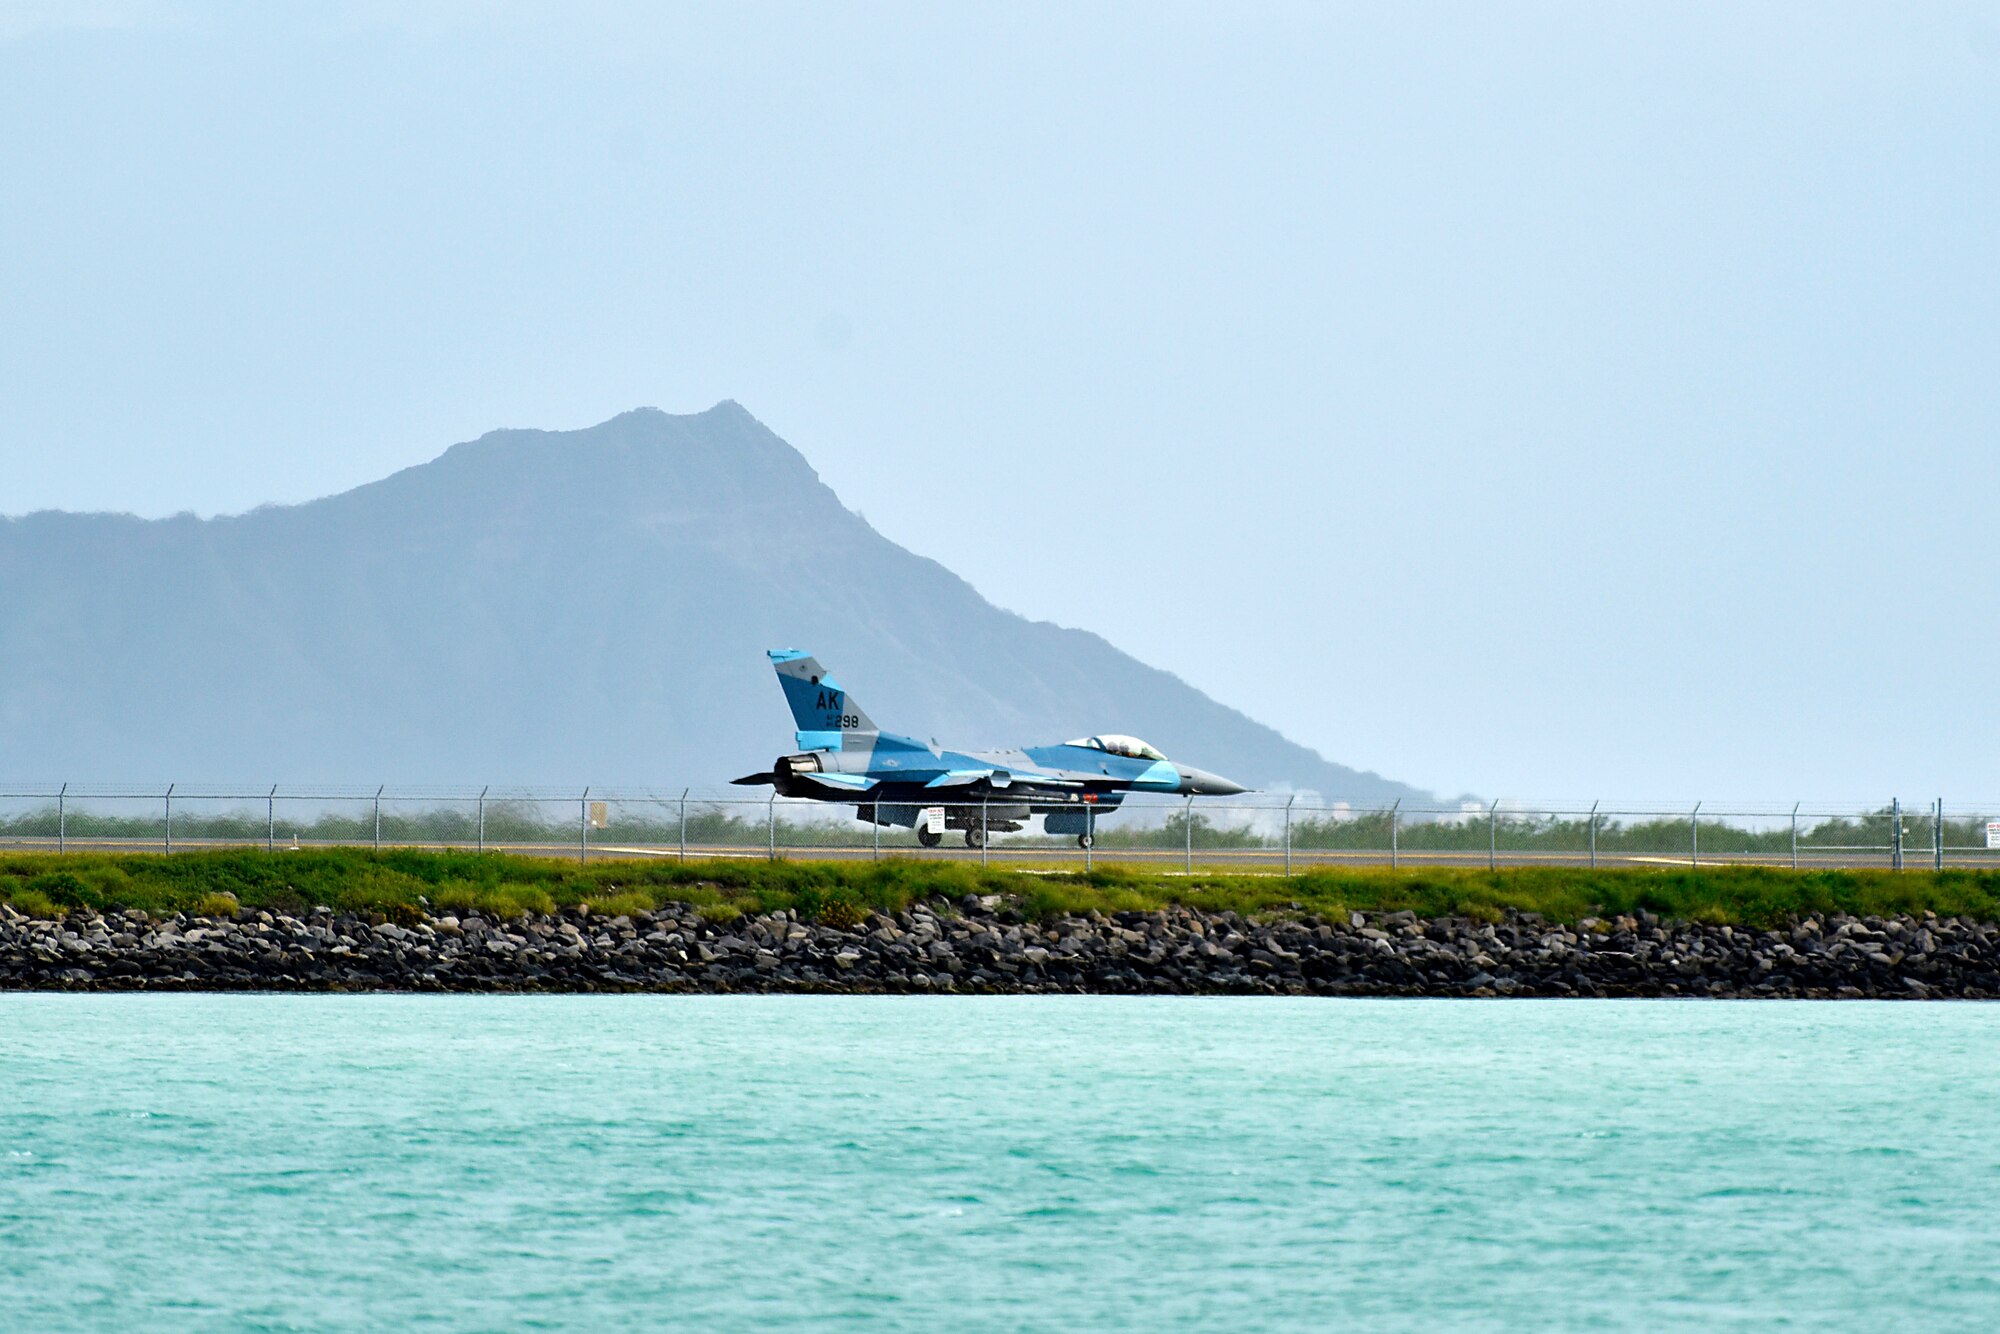 An F-16 Fighting Falcon assigned to the 18th Aggressor Squadron taxis down the runway during Sentry Aloha 20-1 at Joint Base Pearl Harbor-Hickam, Hawaii, Jan. 15, 2020. The 18th AGRS utilizes mobile training teams to train U.S. Air Force, Air National Guard and joint partner nations in different environments, to include arctic, desert and tropical locations. (U.S. Air Force photo by Senior Airman Beaux Hebert)